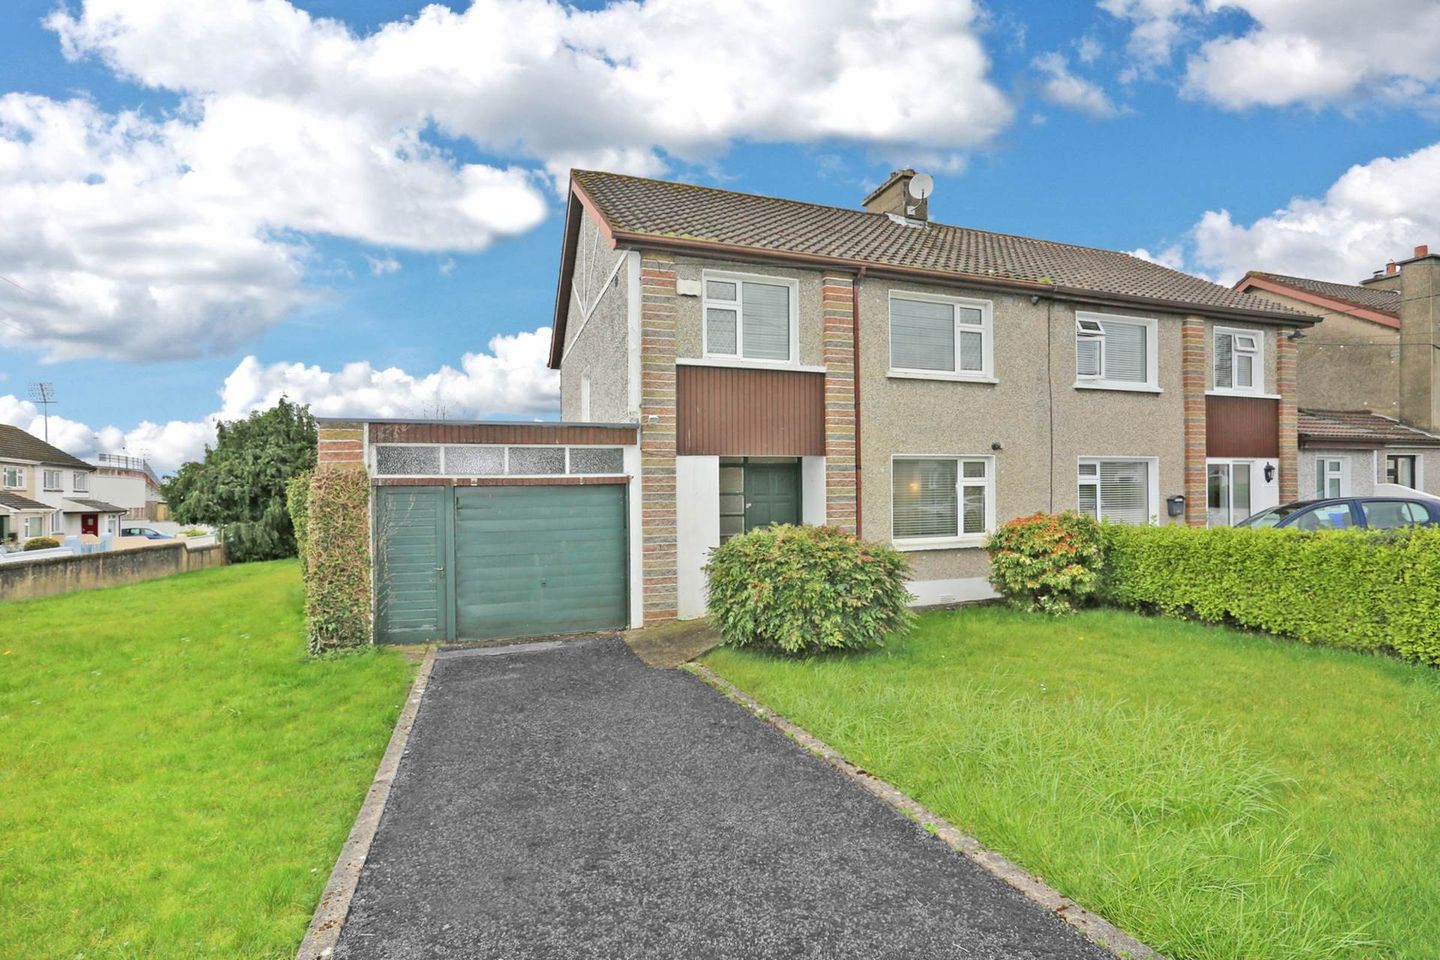 1 Lissadell Drive, Clareview, Co. Limerick, V94YCY8